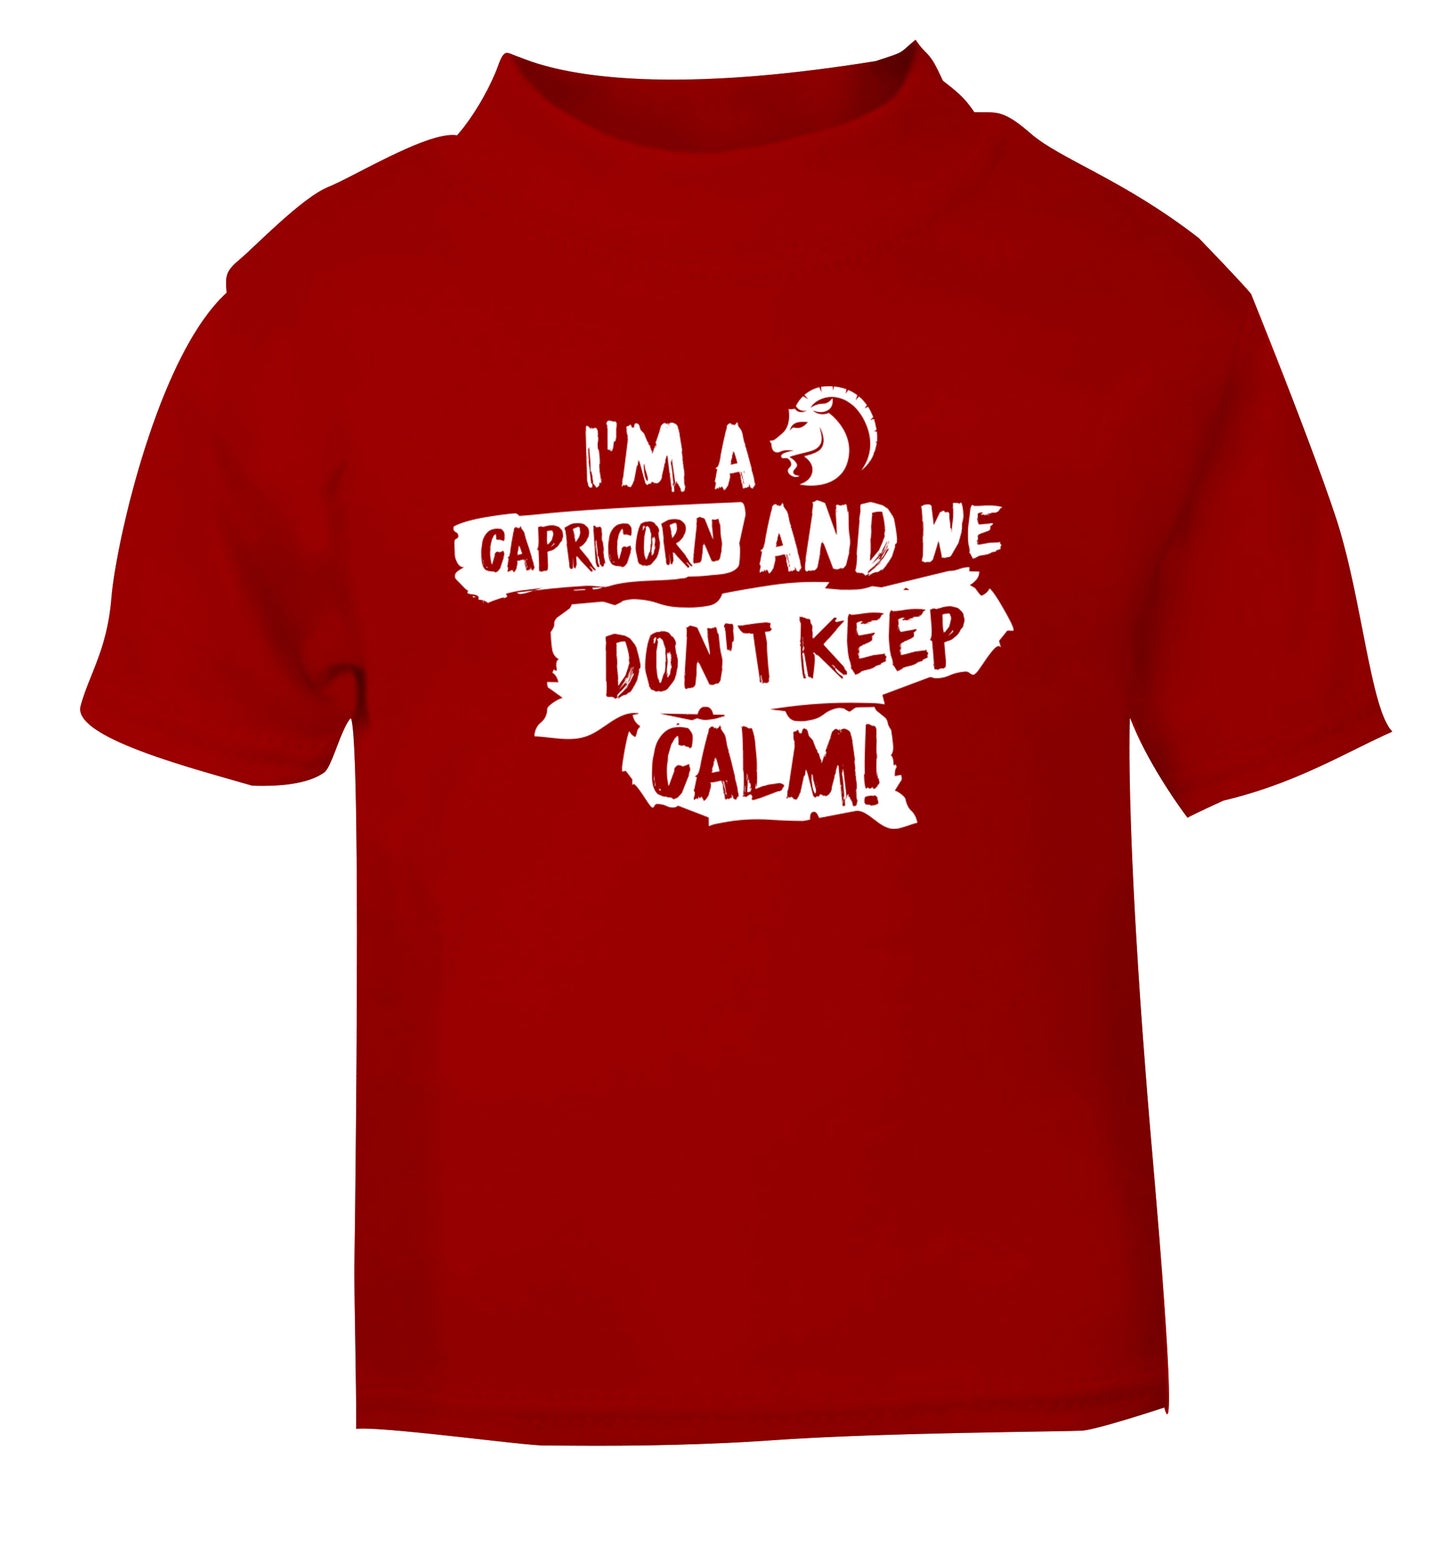 I'm a capricorn and we don't keep calm red Baby Toddler Tshirt 2 Years